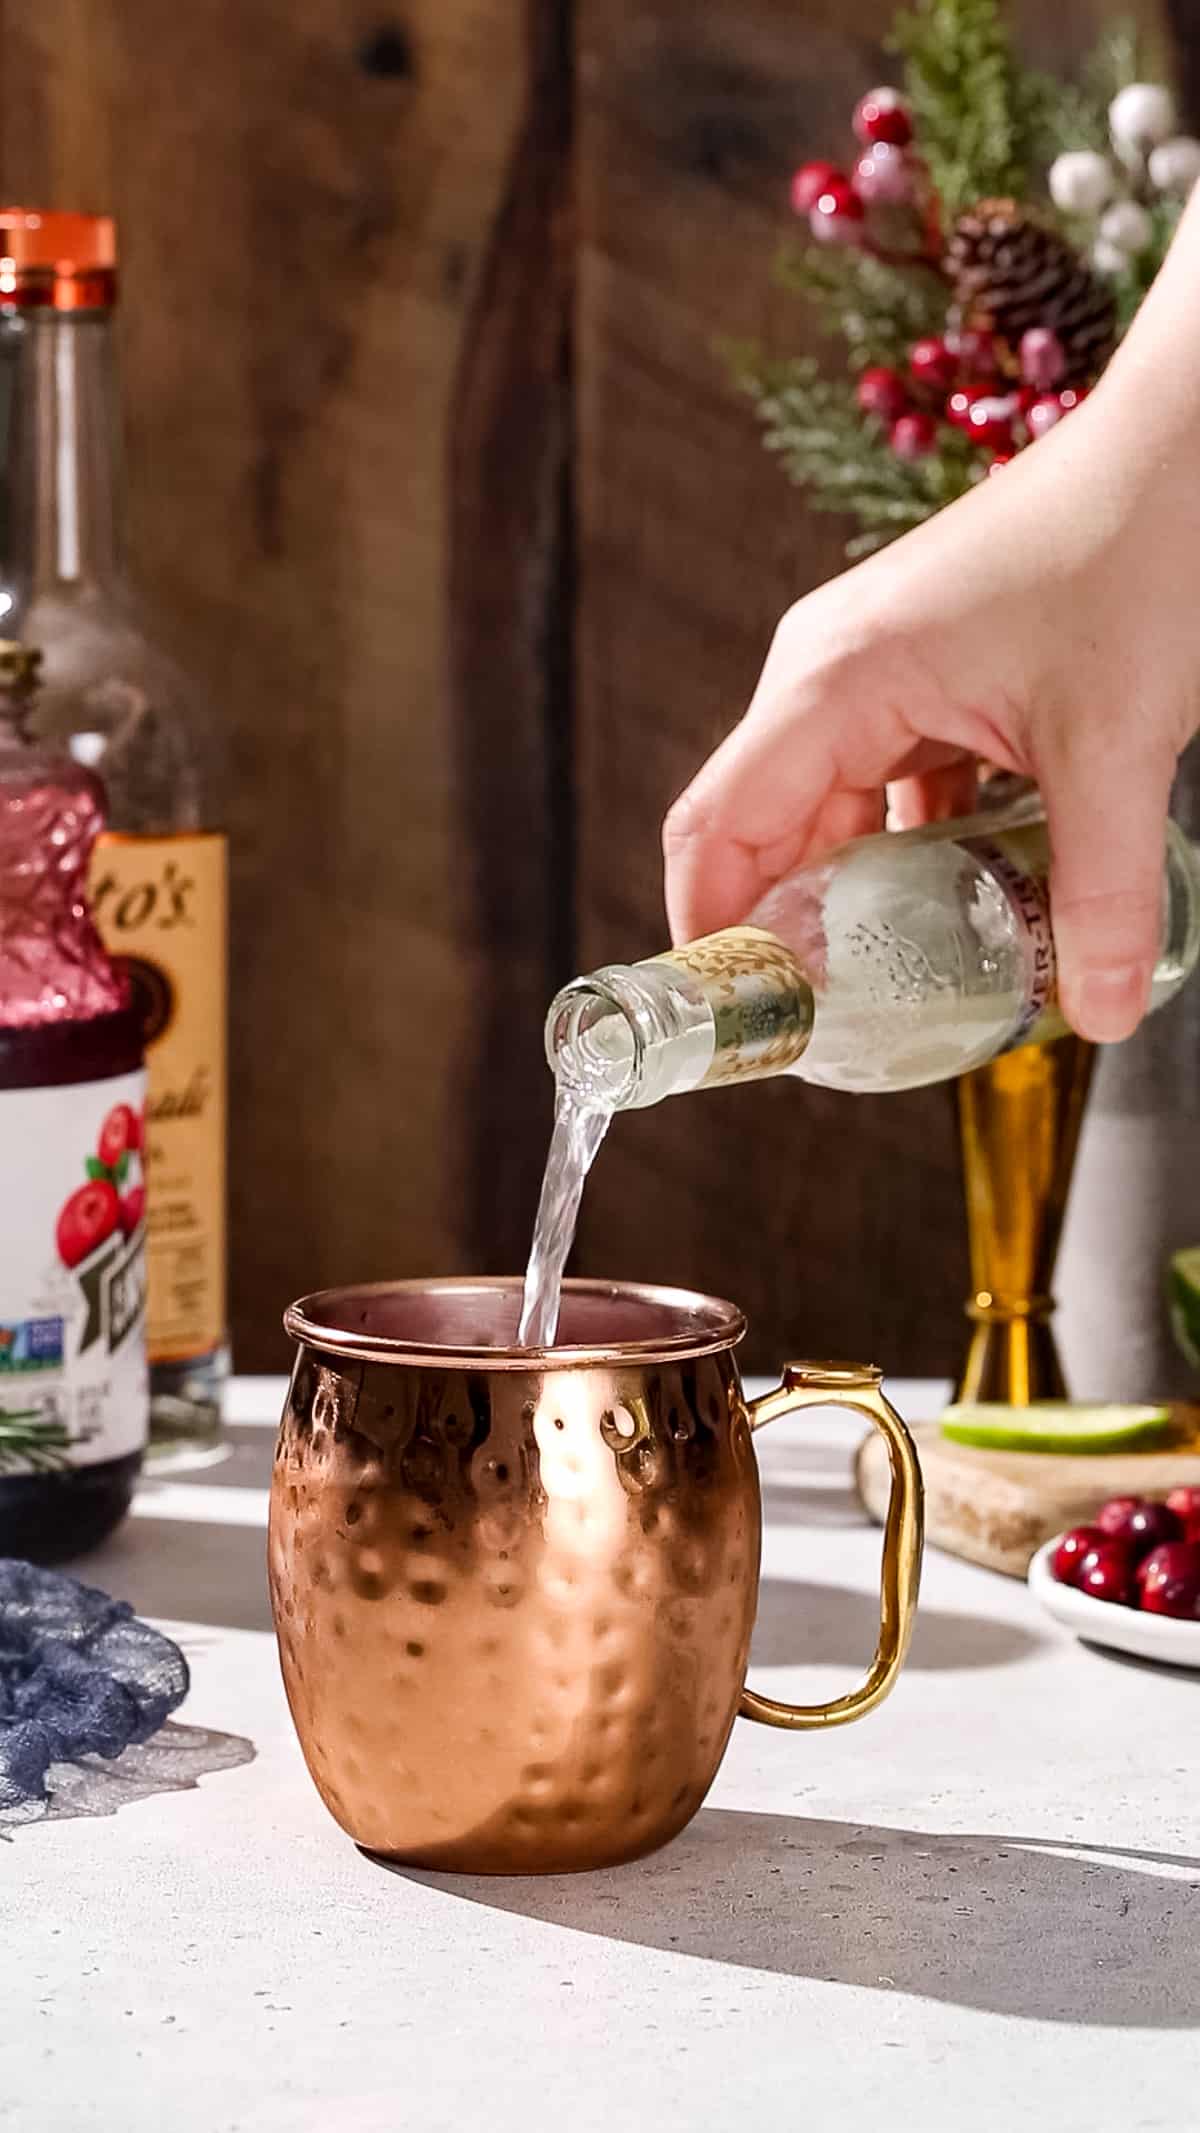 Hand pouring ginger beer from a glass bottle into a copper mug.